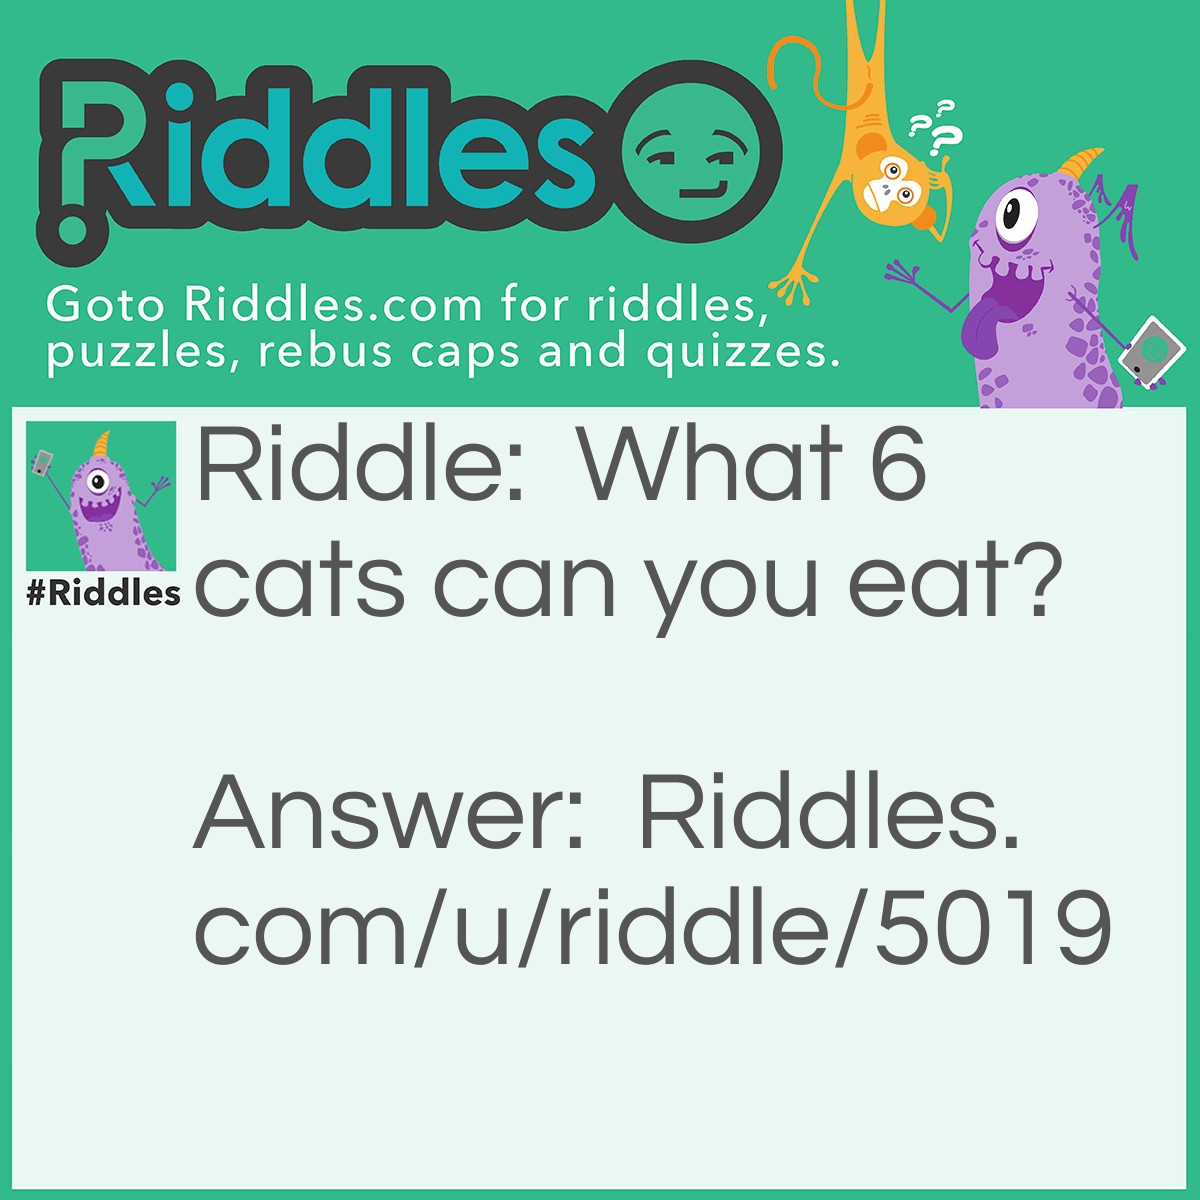 Riddle: What 6 cats can you eat? Answer: Catfish, Catsup, Kit Cats, Sia-peas Cats, Avacatdo and Laffy Tabby Cats.